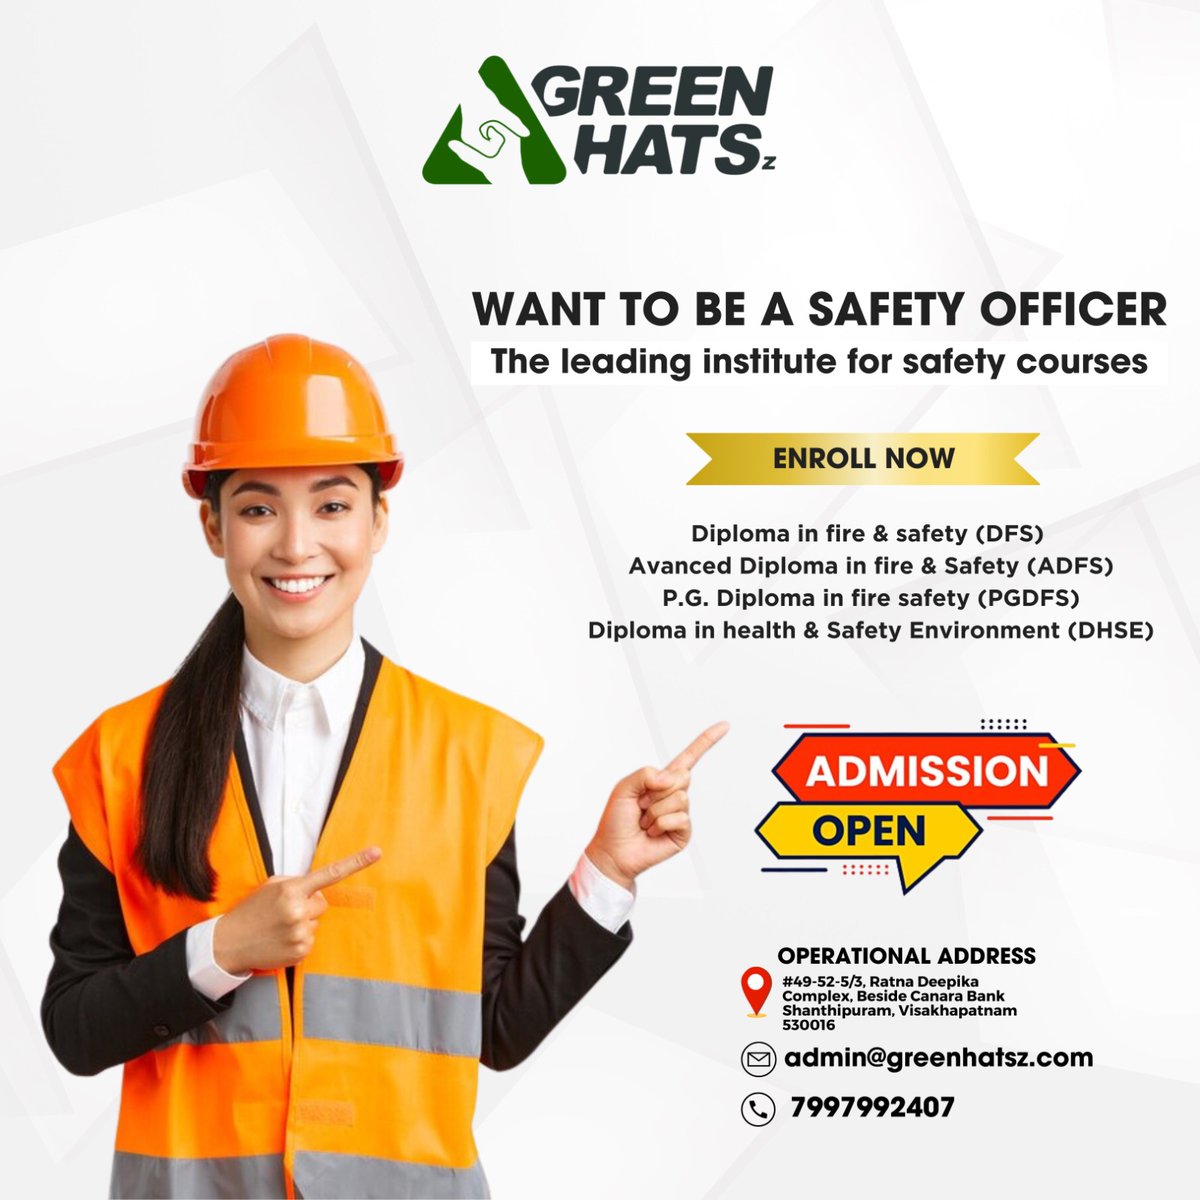 🔥 Ready to become a safety officer and make a difference? Look no further than Greenhatsz, the leading institute for safety courses!

#SafetyOfficerTraining #Greenhatsz #SecureYourFuture #FireSafetyDiploma #SafetyTraining #FirePrevention
#EmergencyResponse #RiskAssessment #Safe